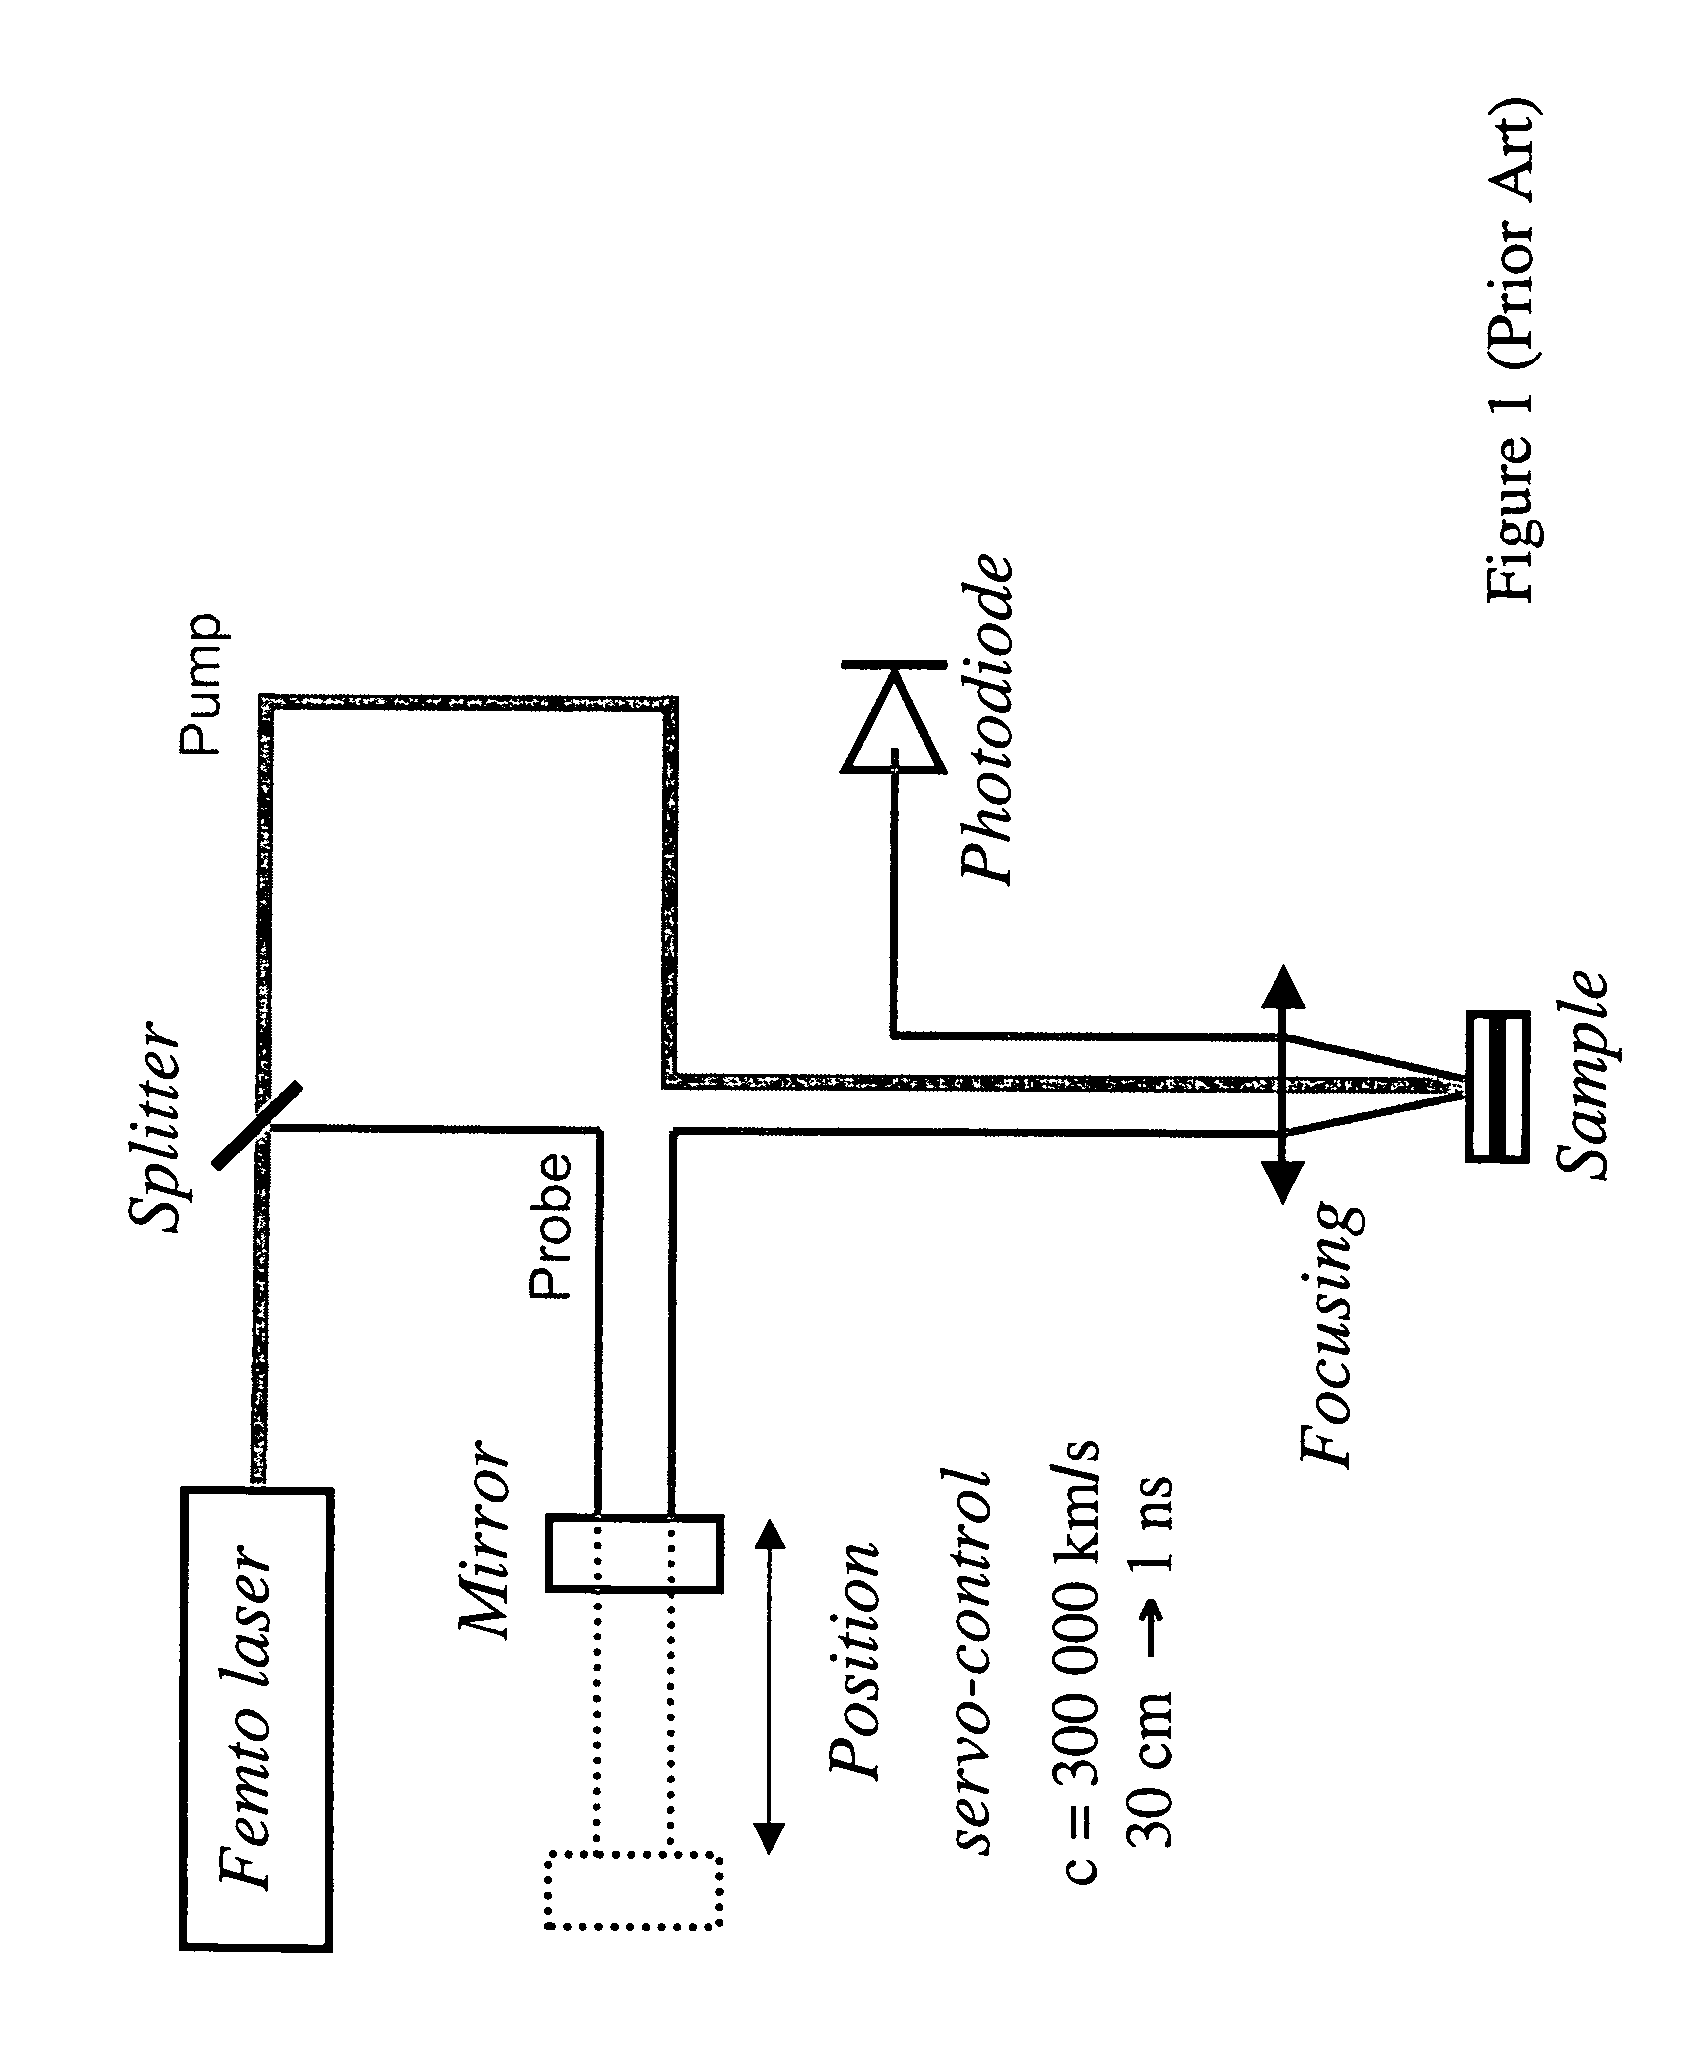 Method and device for characterising a structure by wavelength effect in a photoacoustic system